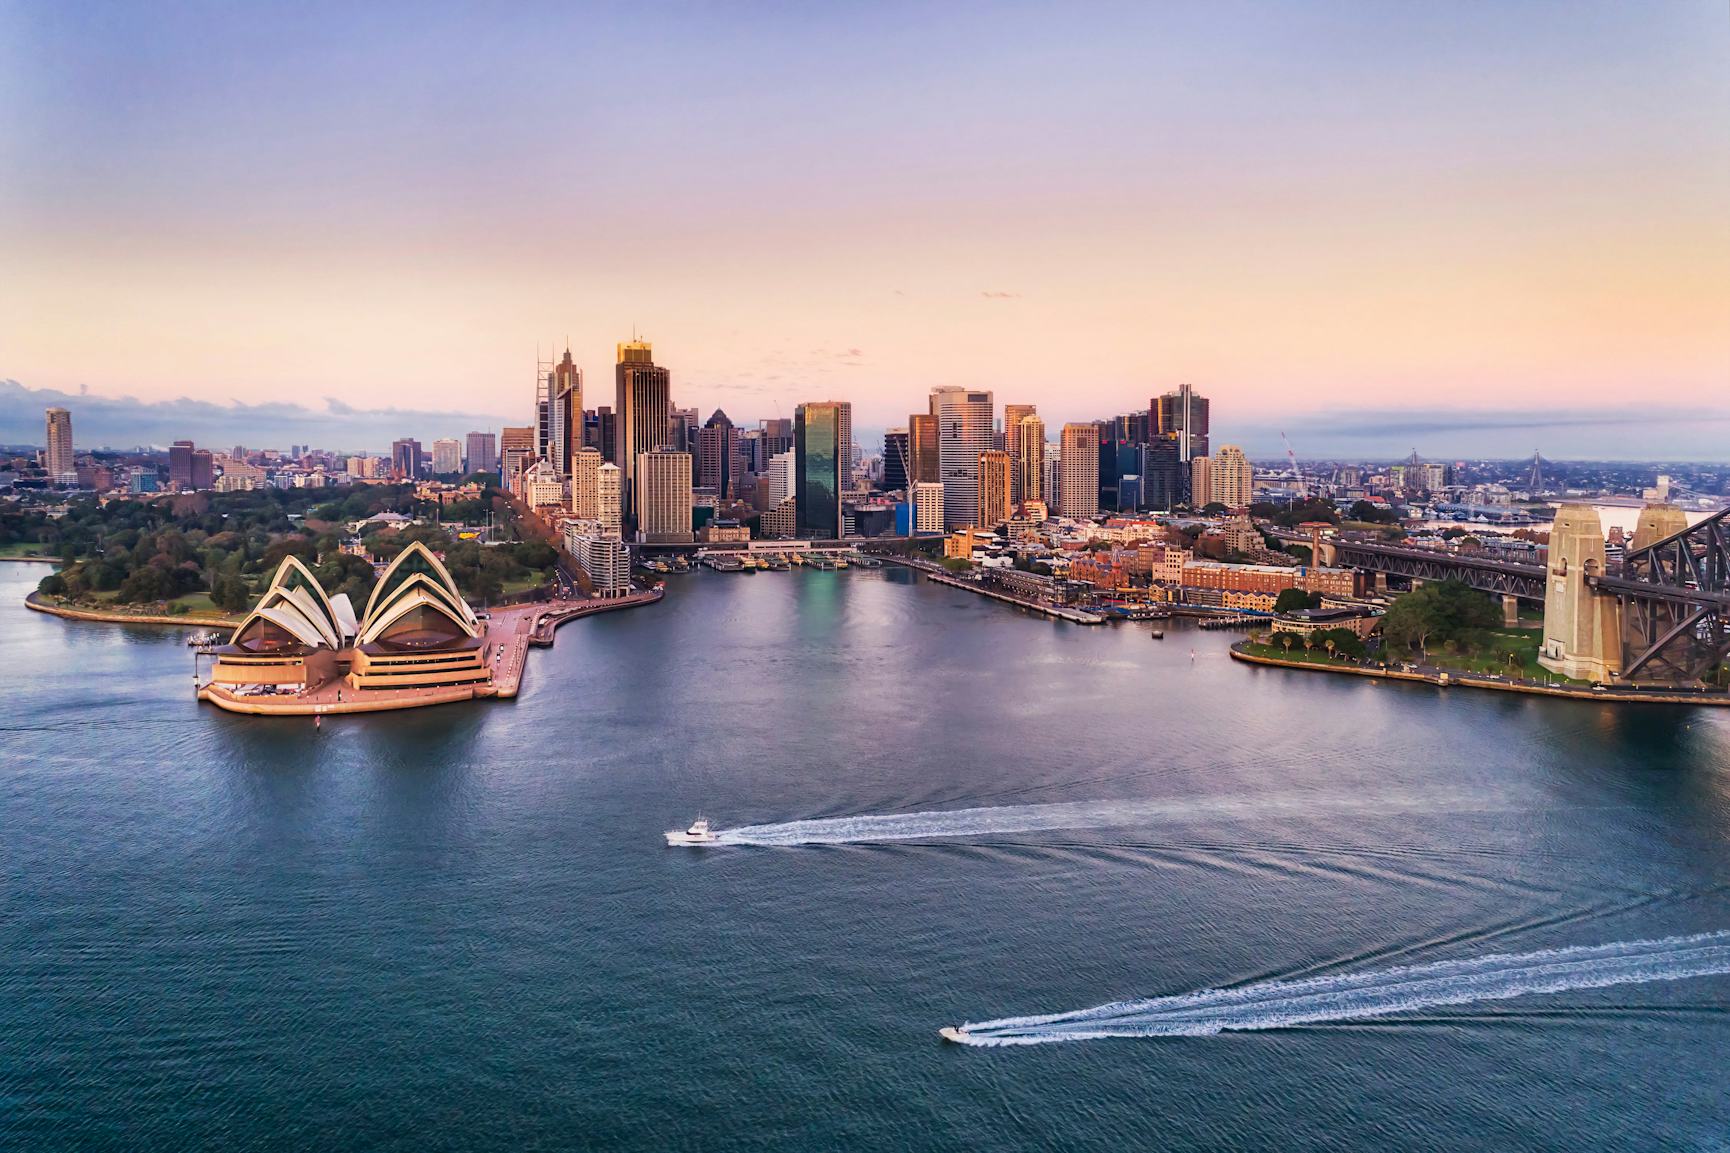 Sydney harbour and skyline captured at sunset with two boats zipping across the water 